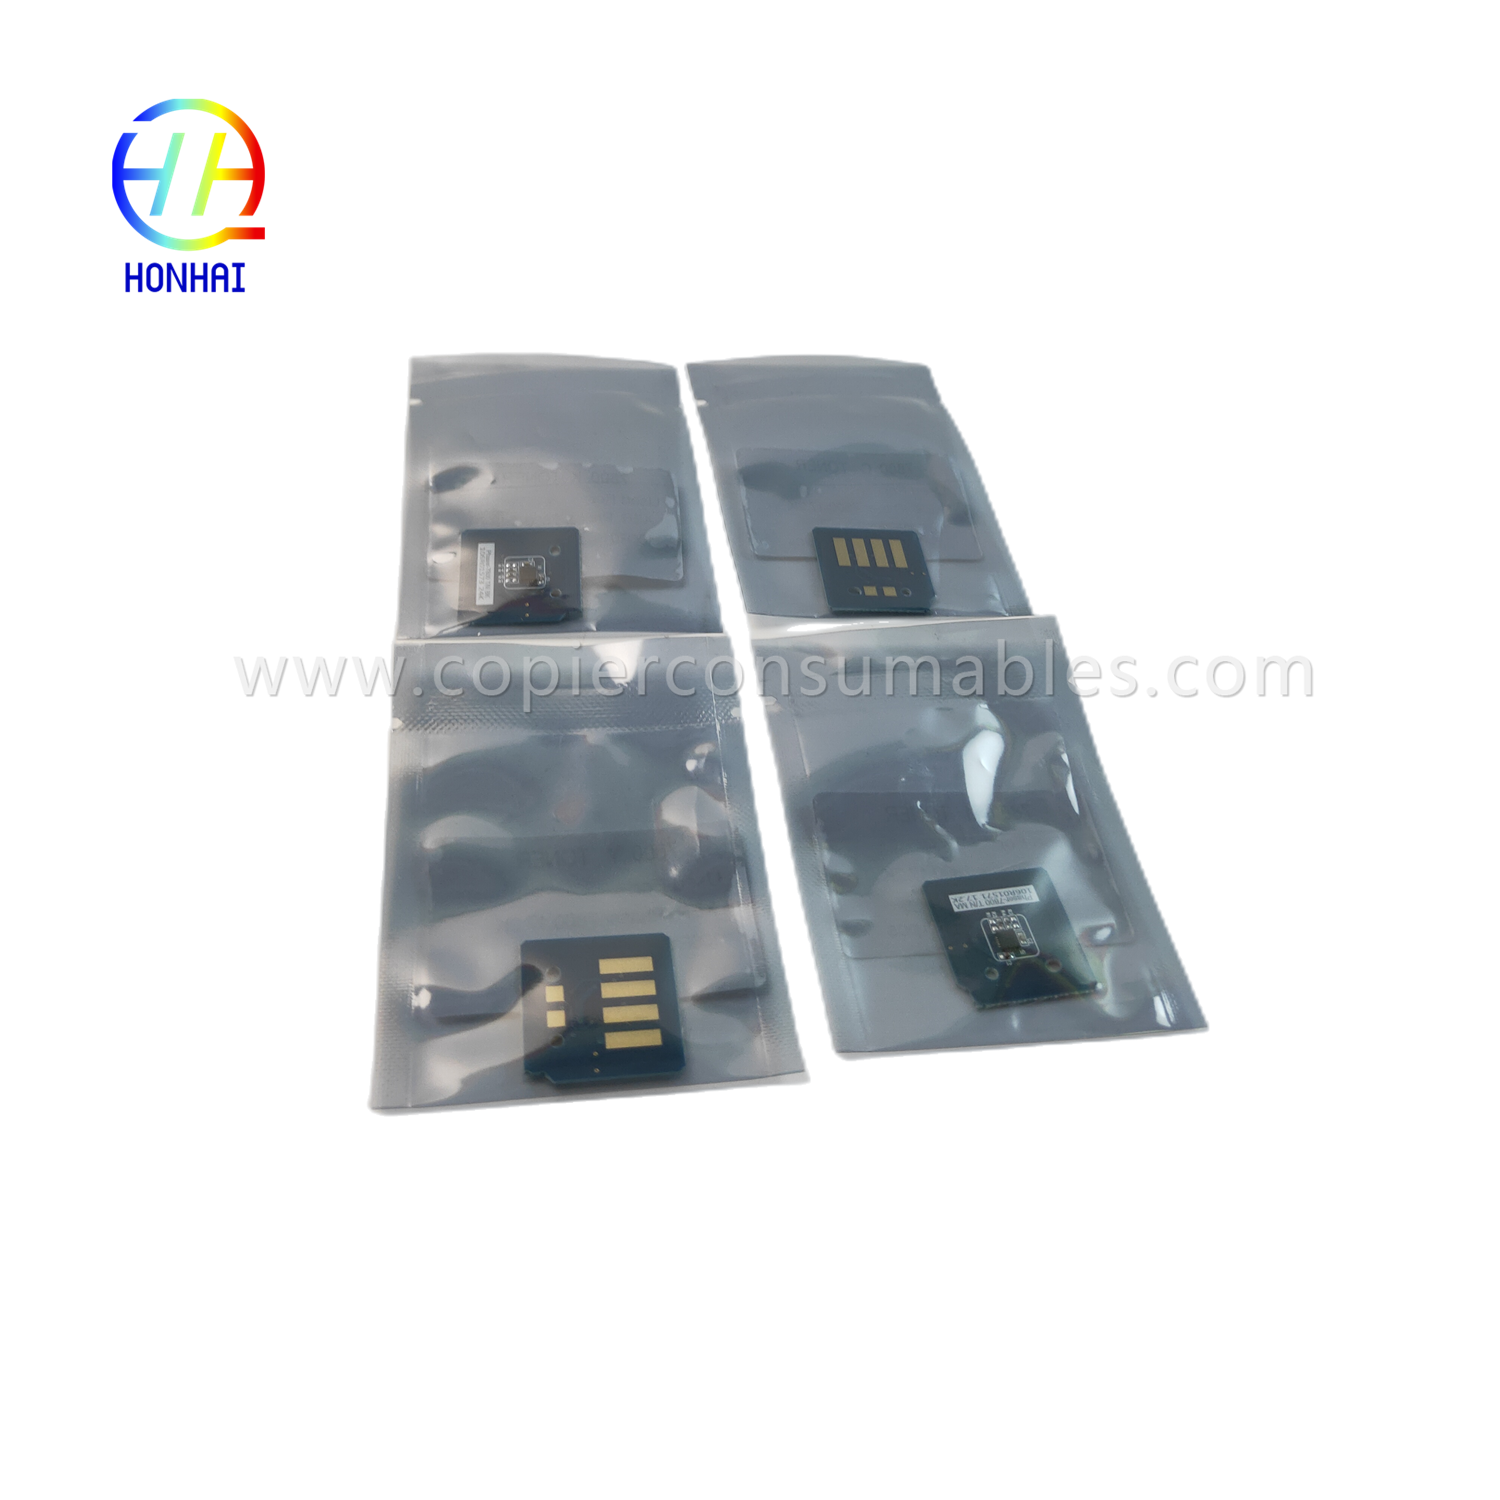 Toner Chip (set) for Xerox Phaser 7800 106R01573 106R01570 106R01571 106R01572 Chip (1)_副本_副本